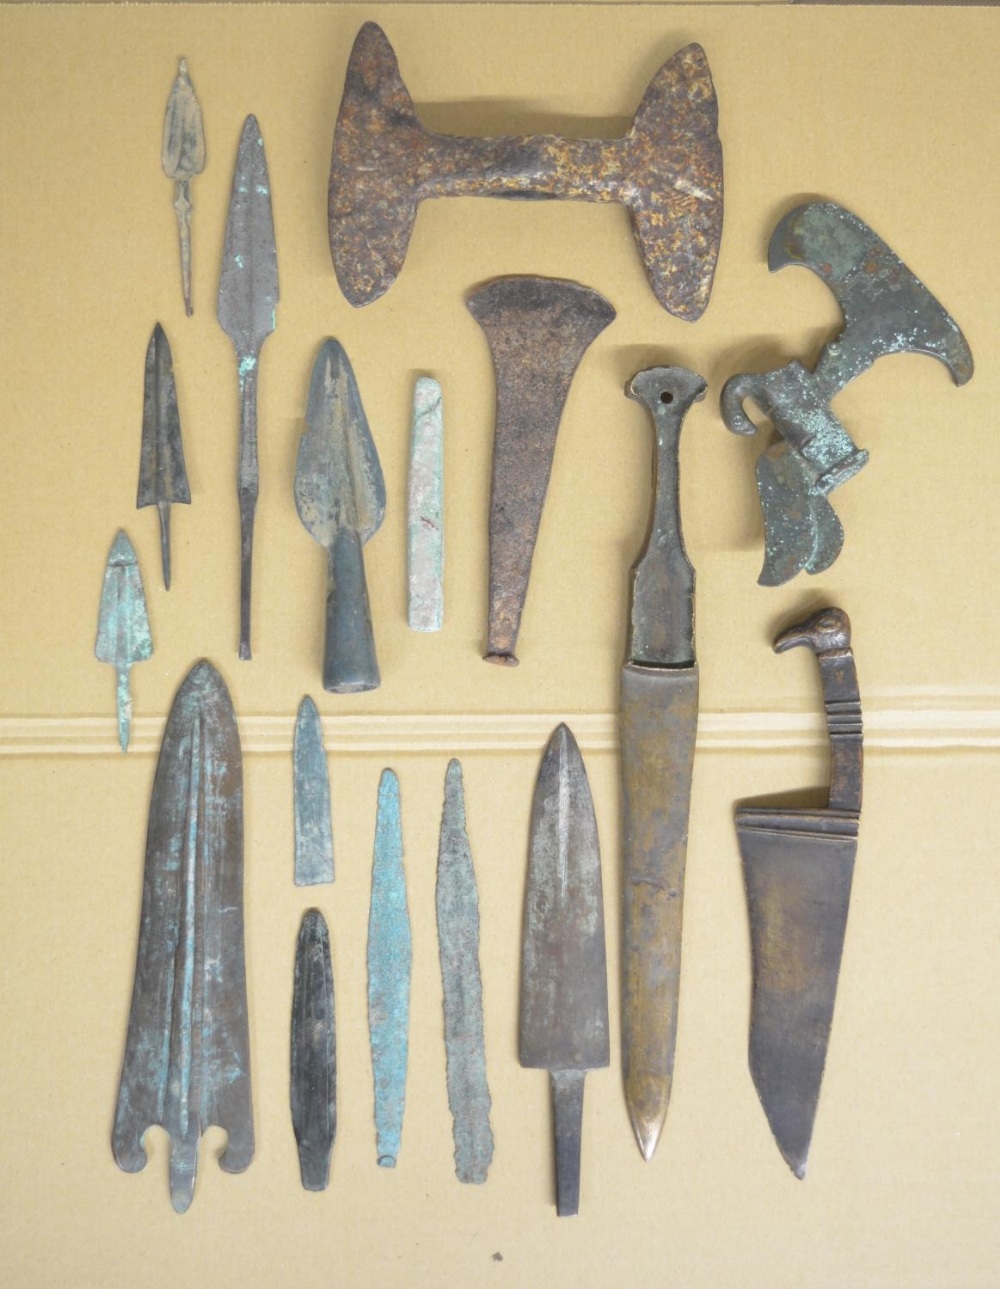 Collection of ancient Greek and Roman copper and bronze knives, spear and arrow heads, a double